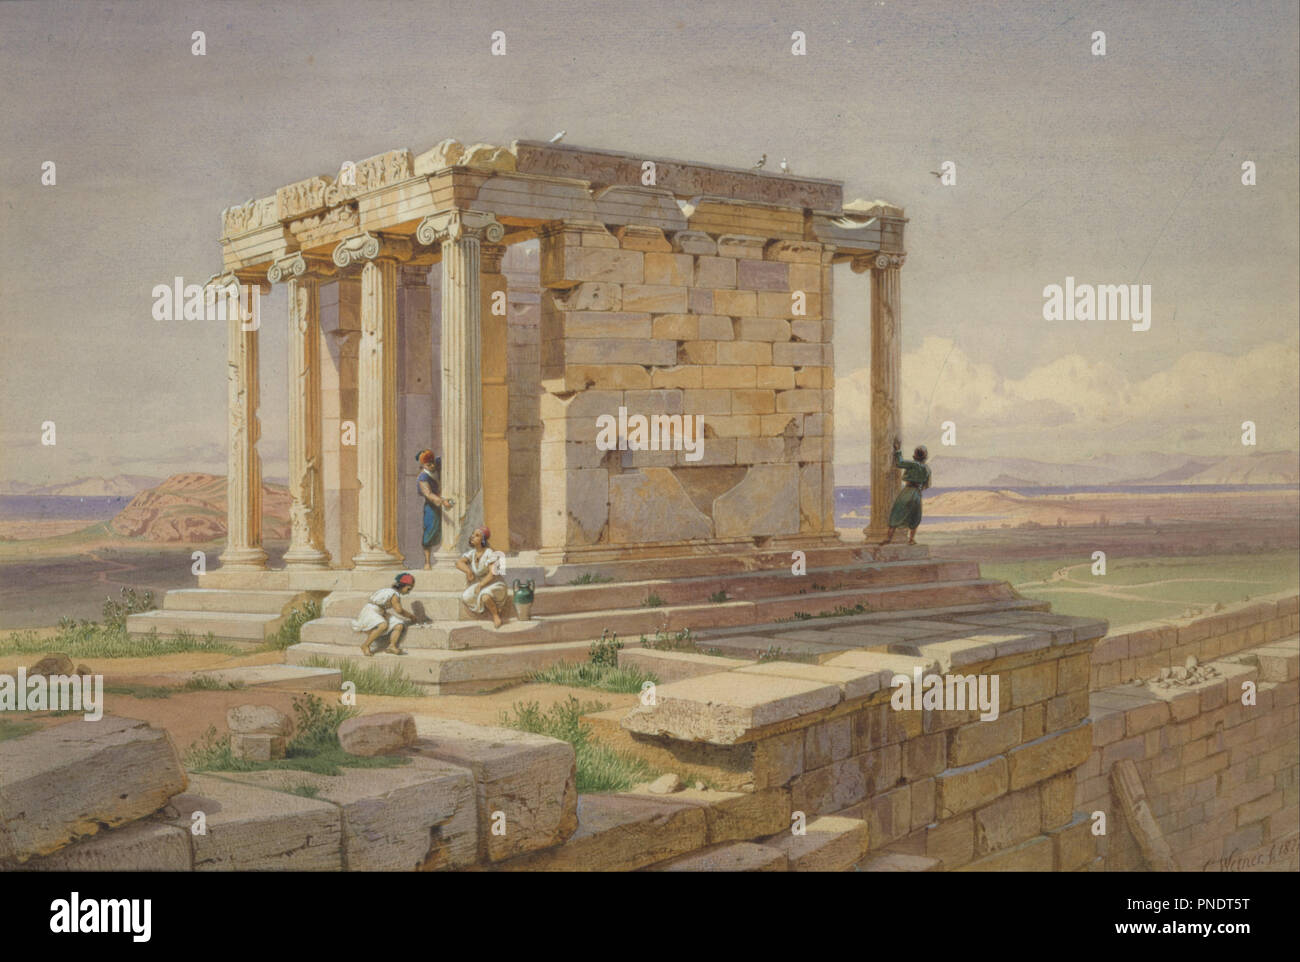 The Temple of Athena Nike. View from the North-East. Date/Period: 1877. Painting. Height: 320 mm (12.59 in); Width: 550 mm (21.65 in). Author: Werner Carl-Friedrich. Werner, Carl Friedrich Heinrich. Stock Photo